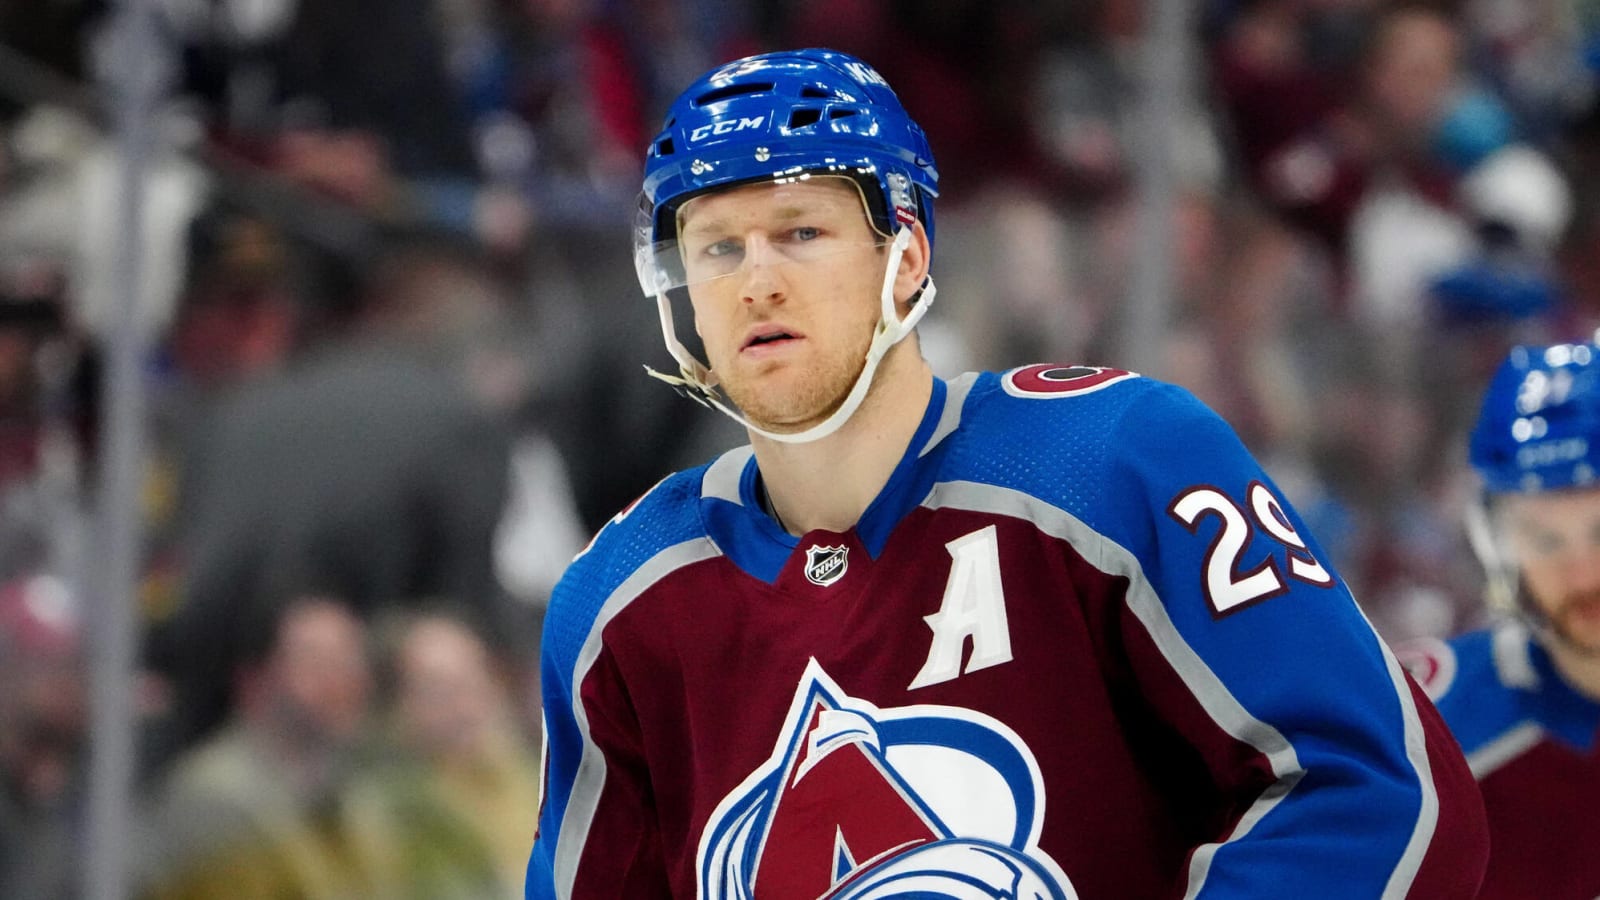 Avalanche star proving unstoppable at home